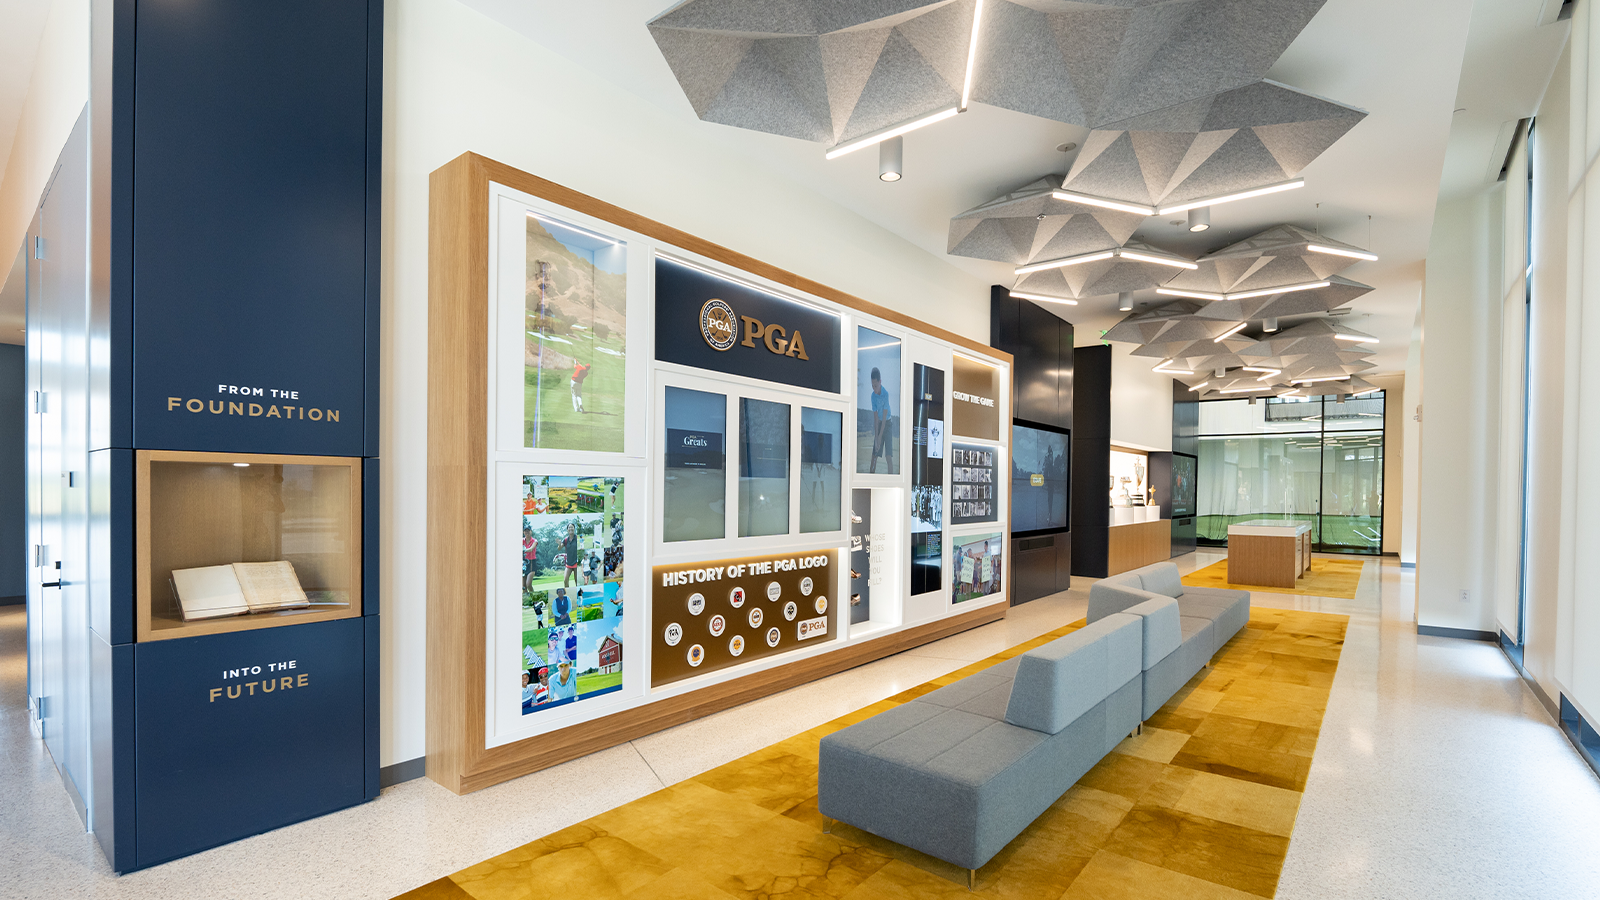 An interactive exhibit inside of the PGA Frisco Headquarters on August 17, 2022 in Frisco, Texas. (Photo by The Marmones LLC/PGA of America)